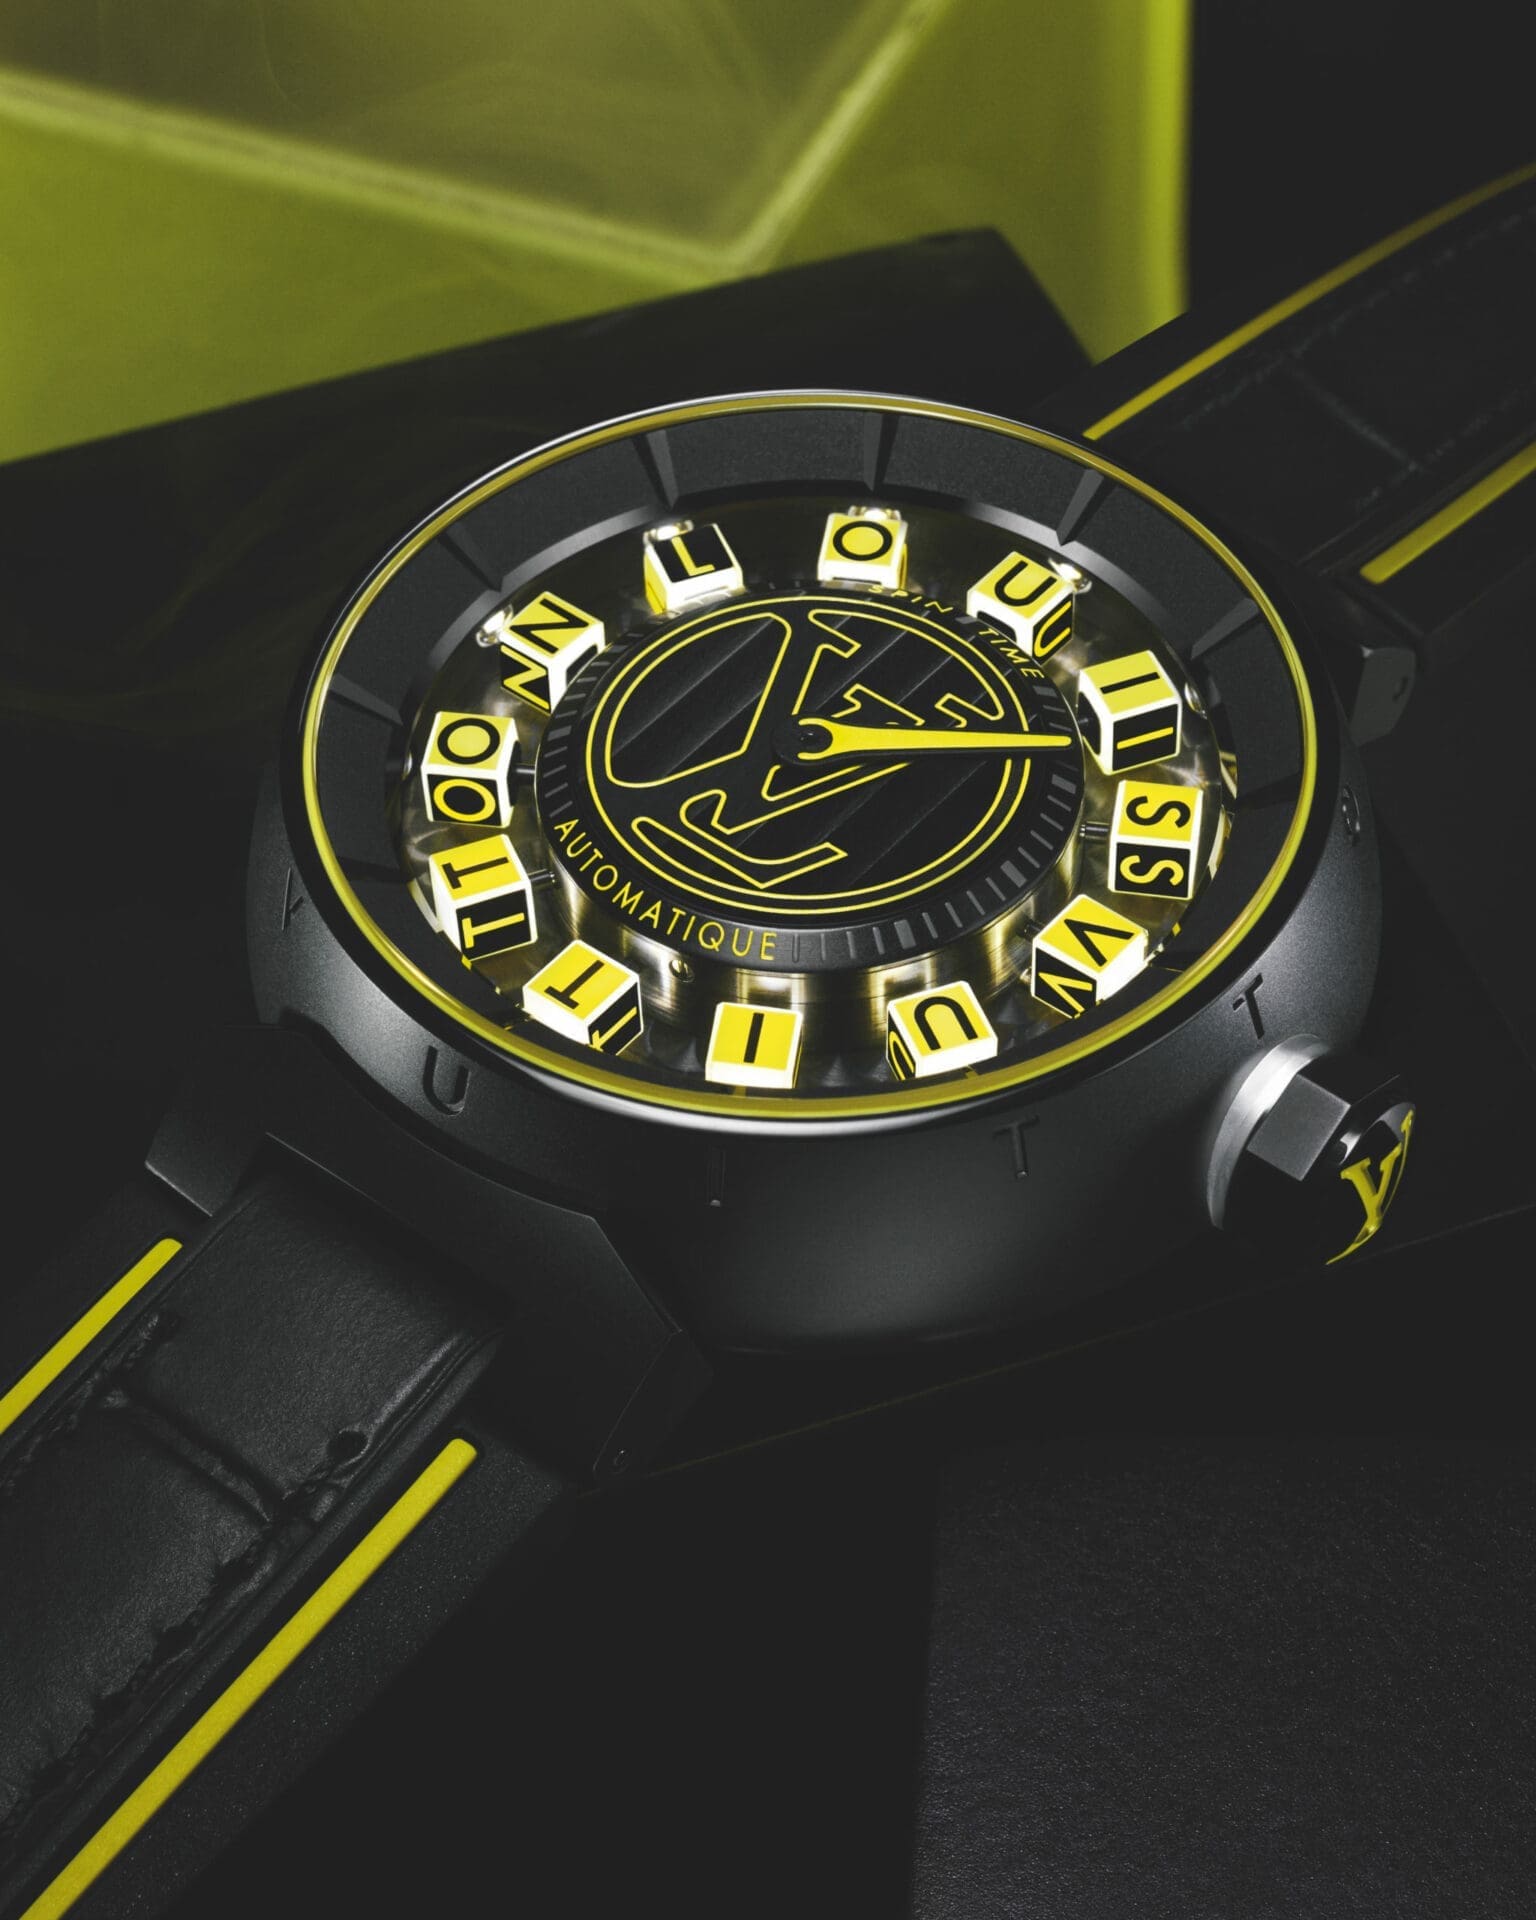 Louis Vuitton's Latest Watch Is Like a Batmobile for Your Wrist